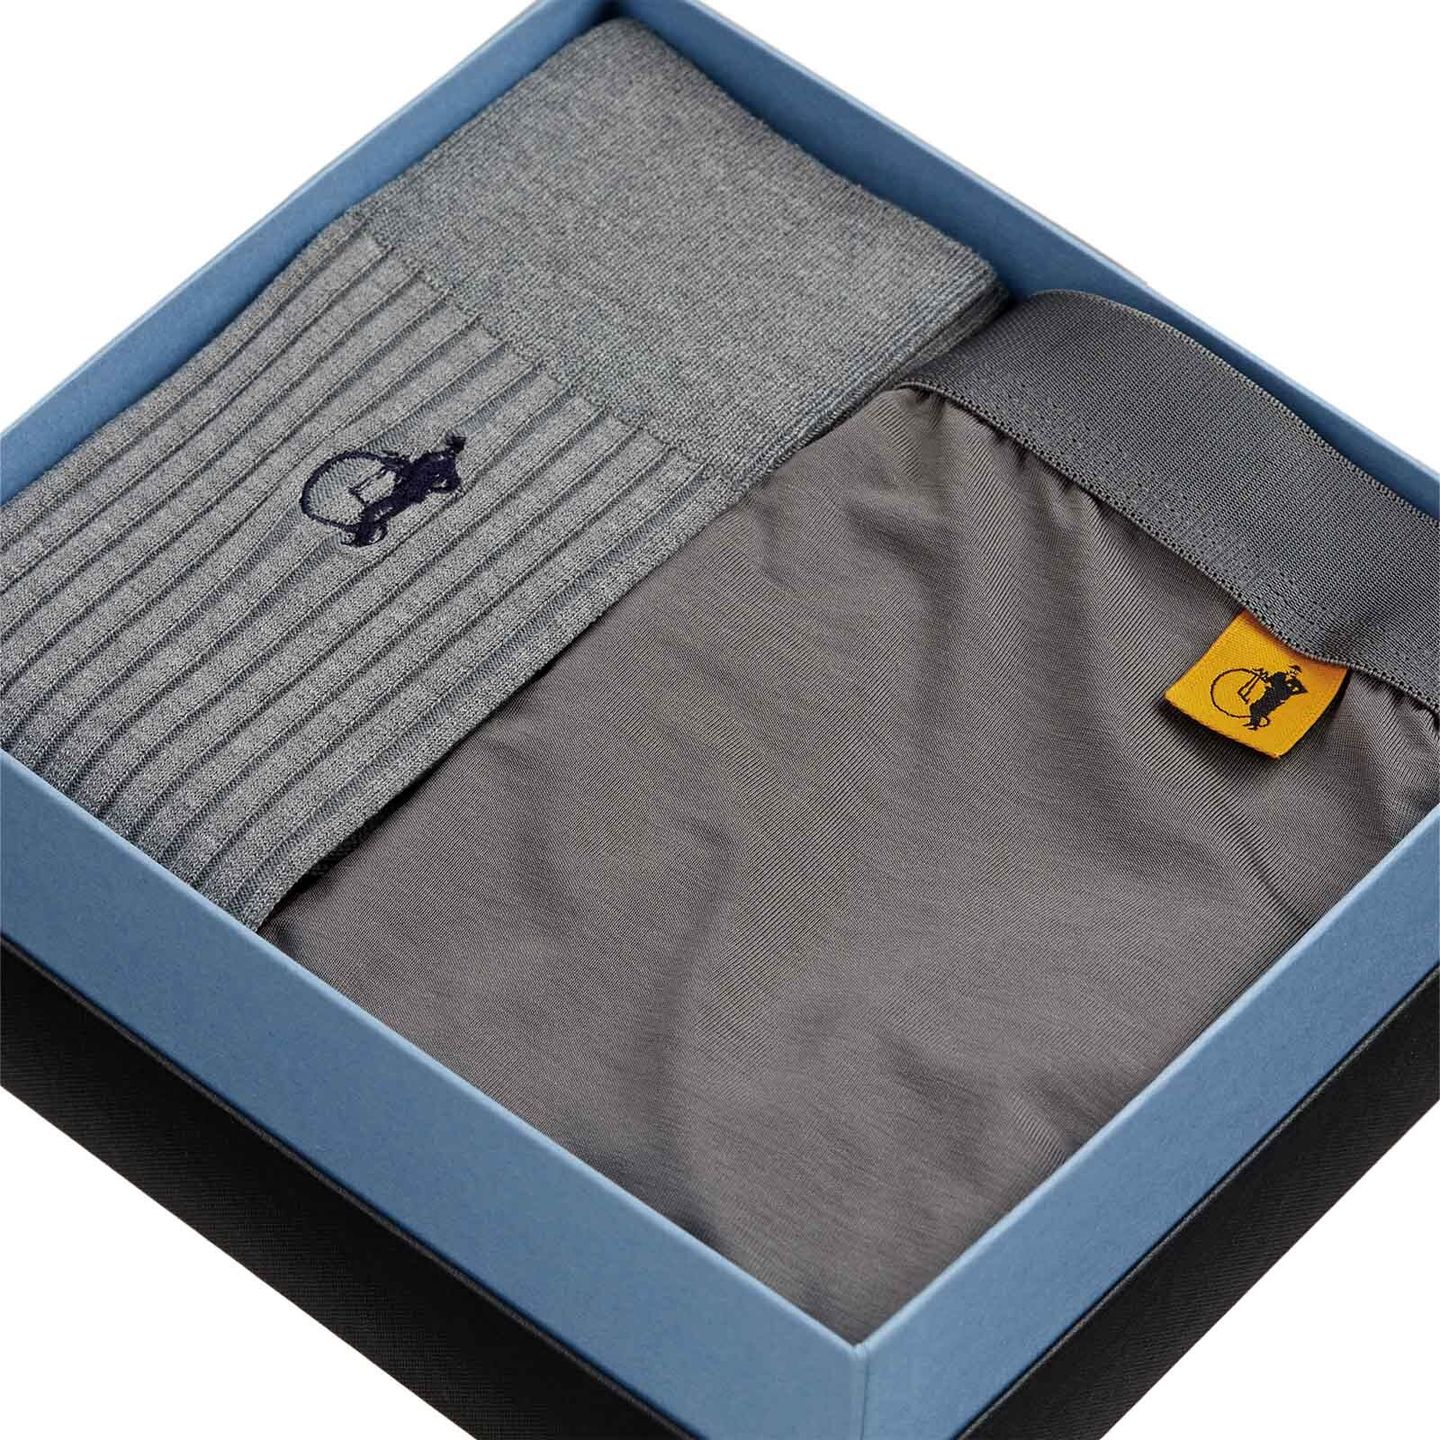 A pair of grey socks packaged together with grey boxers